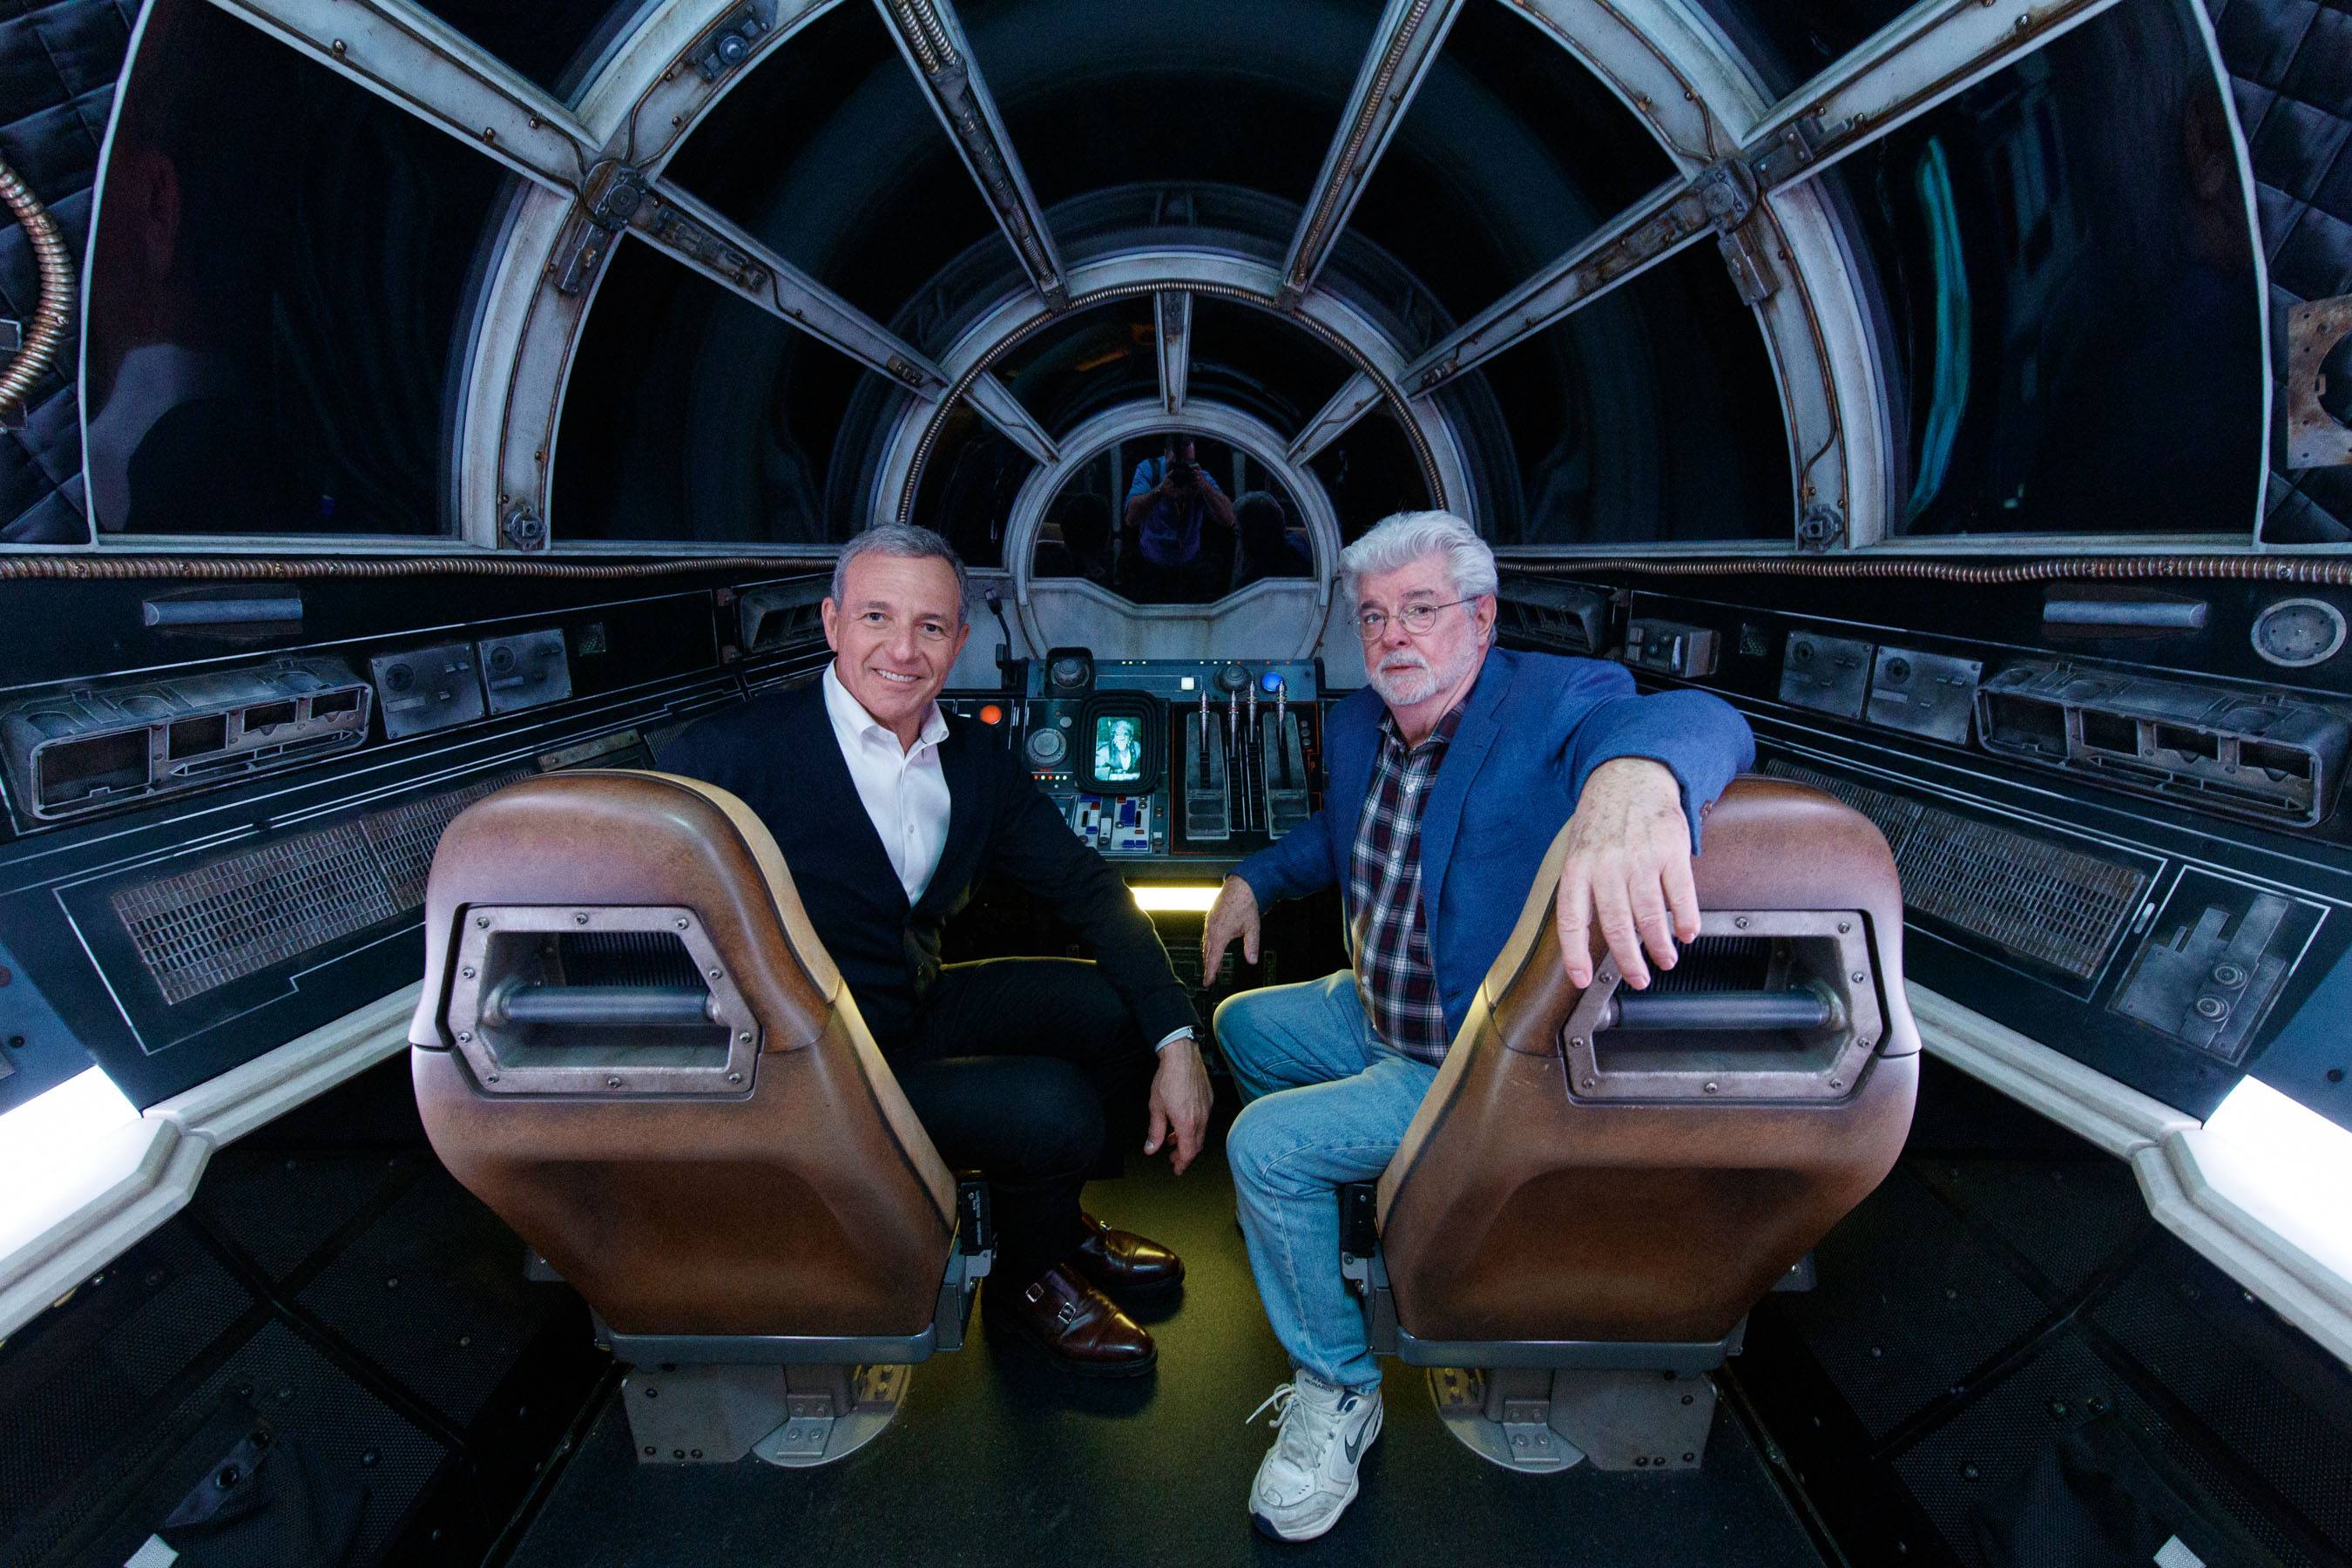 Bob Iger, Walt Disney Company Chairman and CEO (left), and George Lucas, Star Wars creator, pose inside Millennium Falcon: Smugglers Run